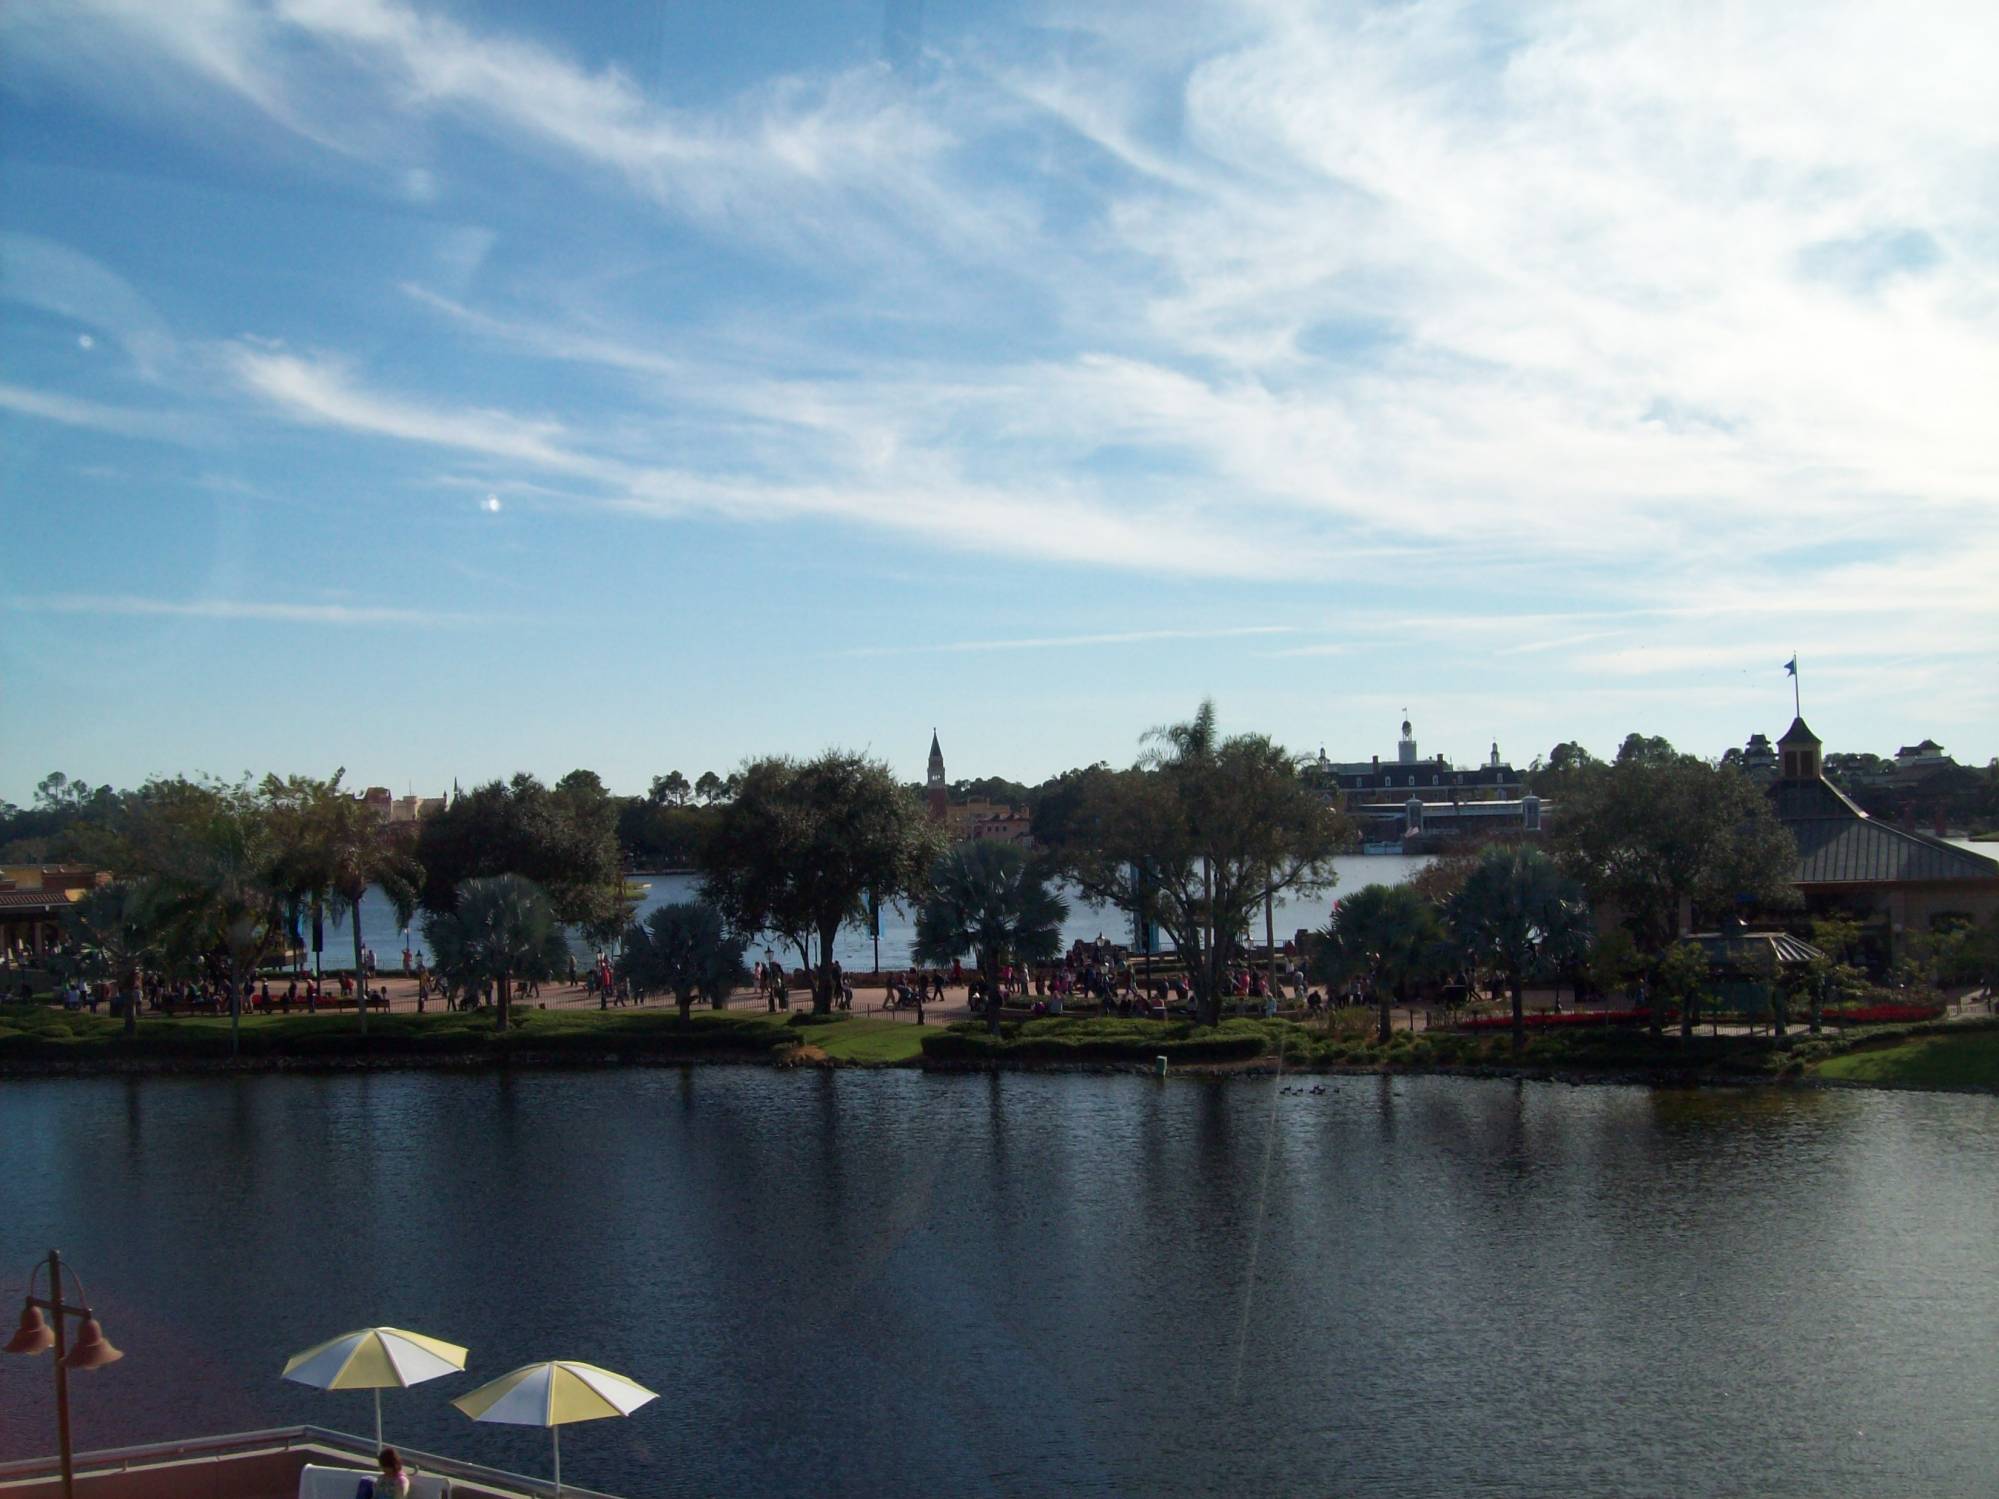 Epcot - World Showcase from monorail